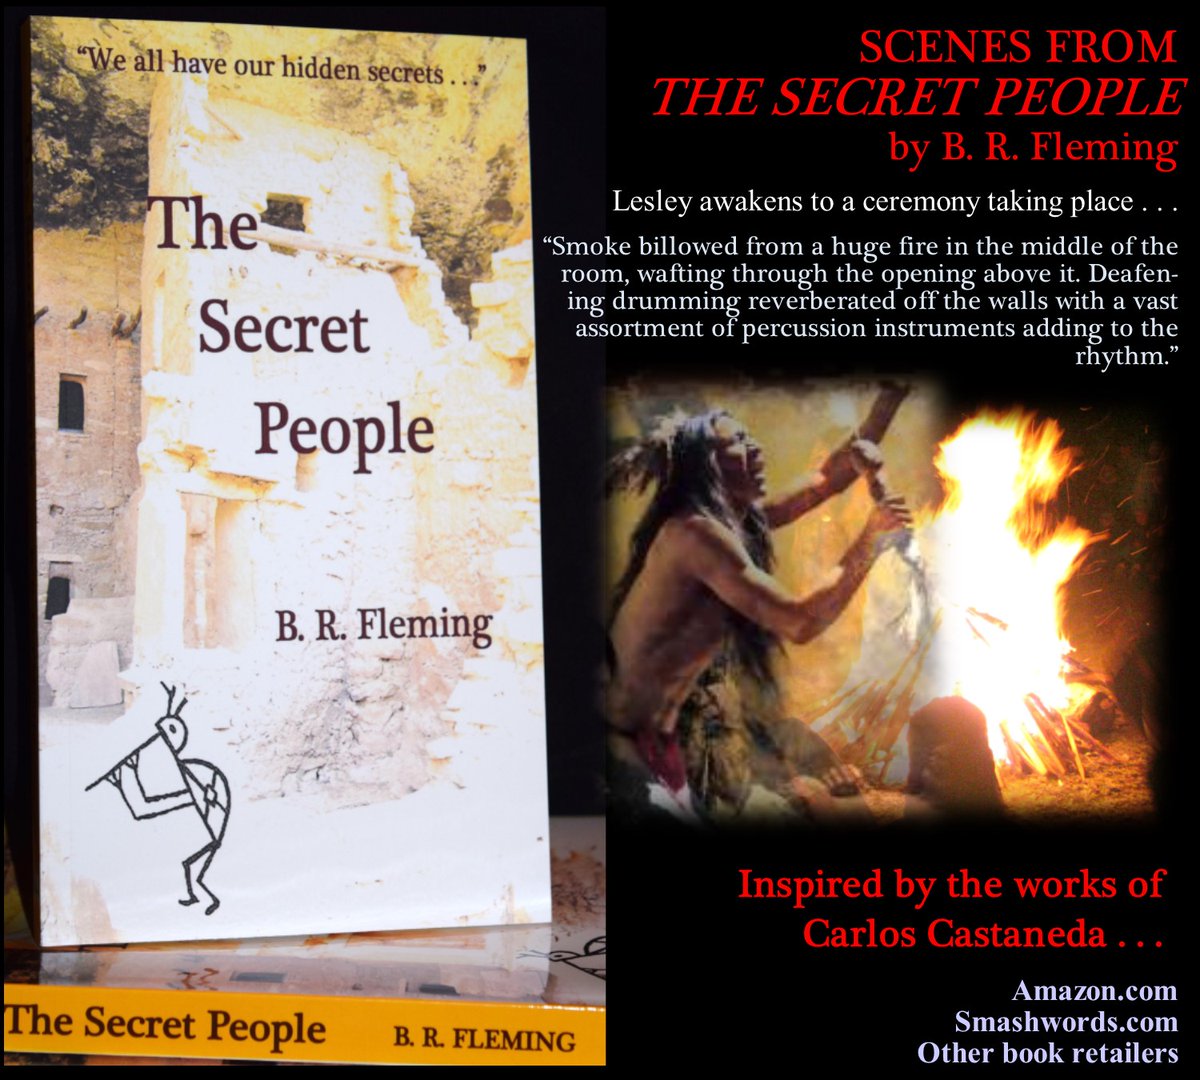 Scenes from #TheSecretPeople
Support #indieauthors #bookshop #BookTwitter #booknerd #BookClub #booklovers #love❤️#books #readersoftwitter #bookpromotion #BooksWorthReading #bookstoread #readerscommunity #readingcommunity #bookpromo #rtItBot #WritingCommunity #SaturdayMood❤️#PROMO